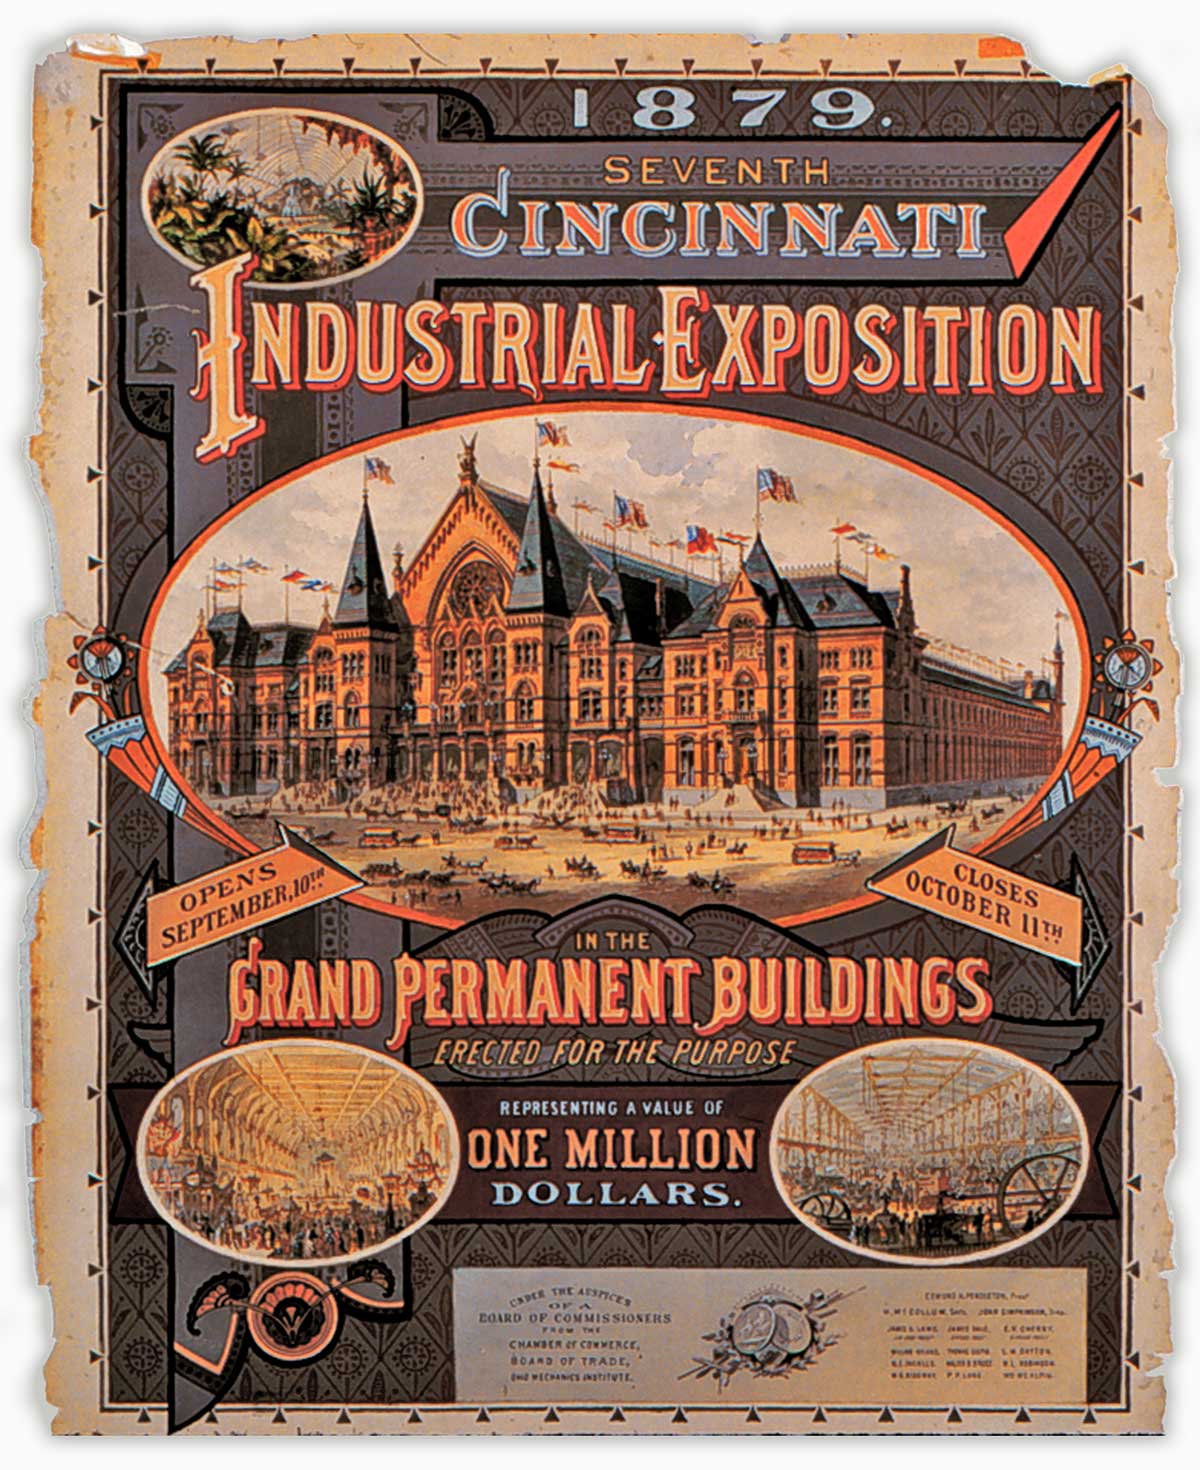 Seventh Industrial Exposition, 1879